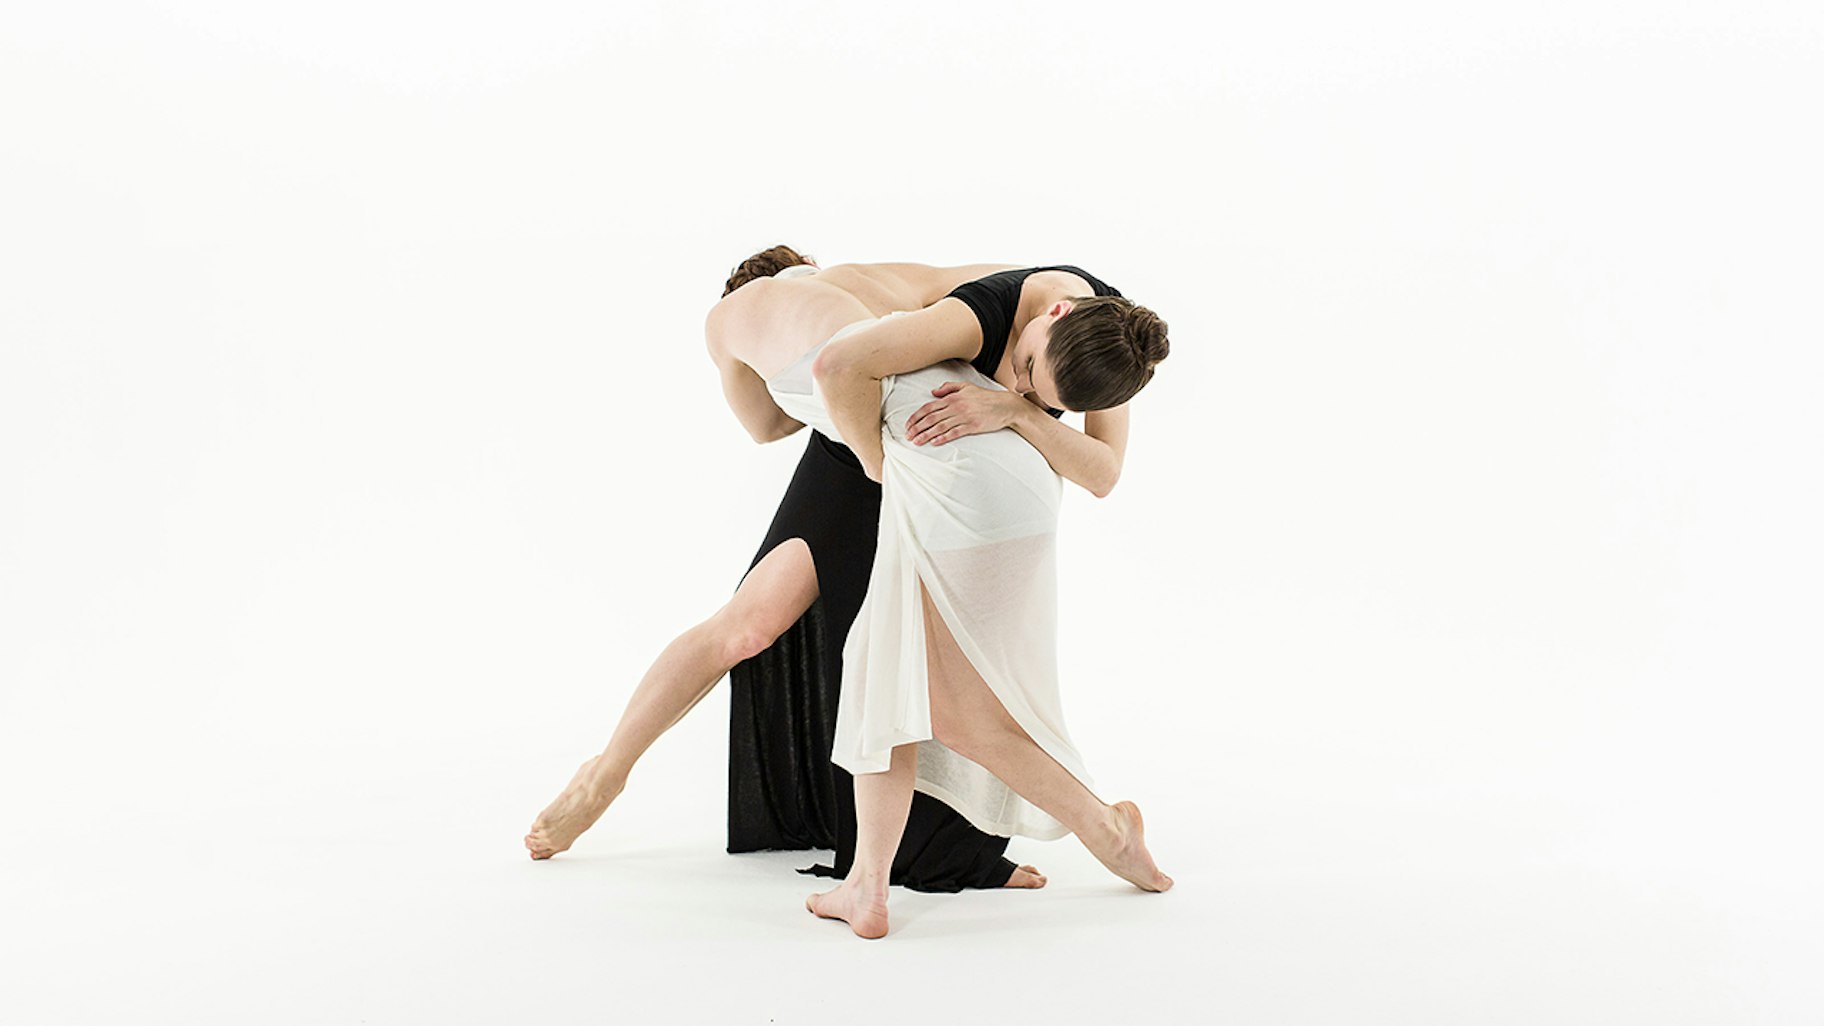 Spark - SPARK with Althea Corlett and Simone Schmidt (Photo by Michael Clemens)